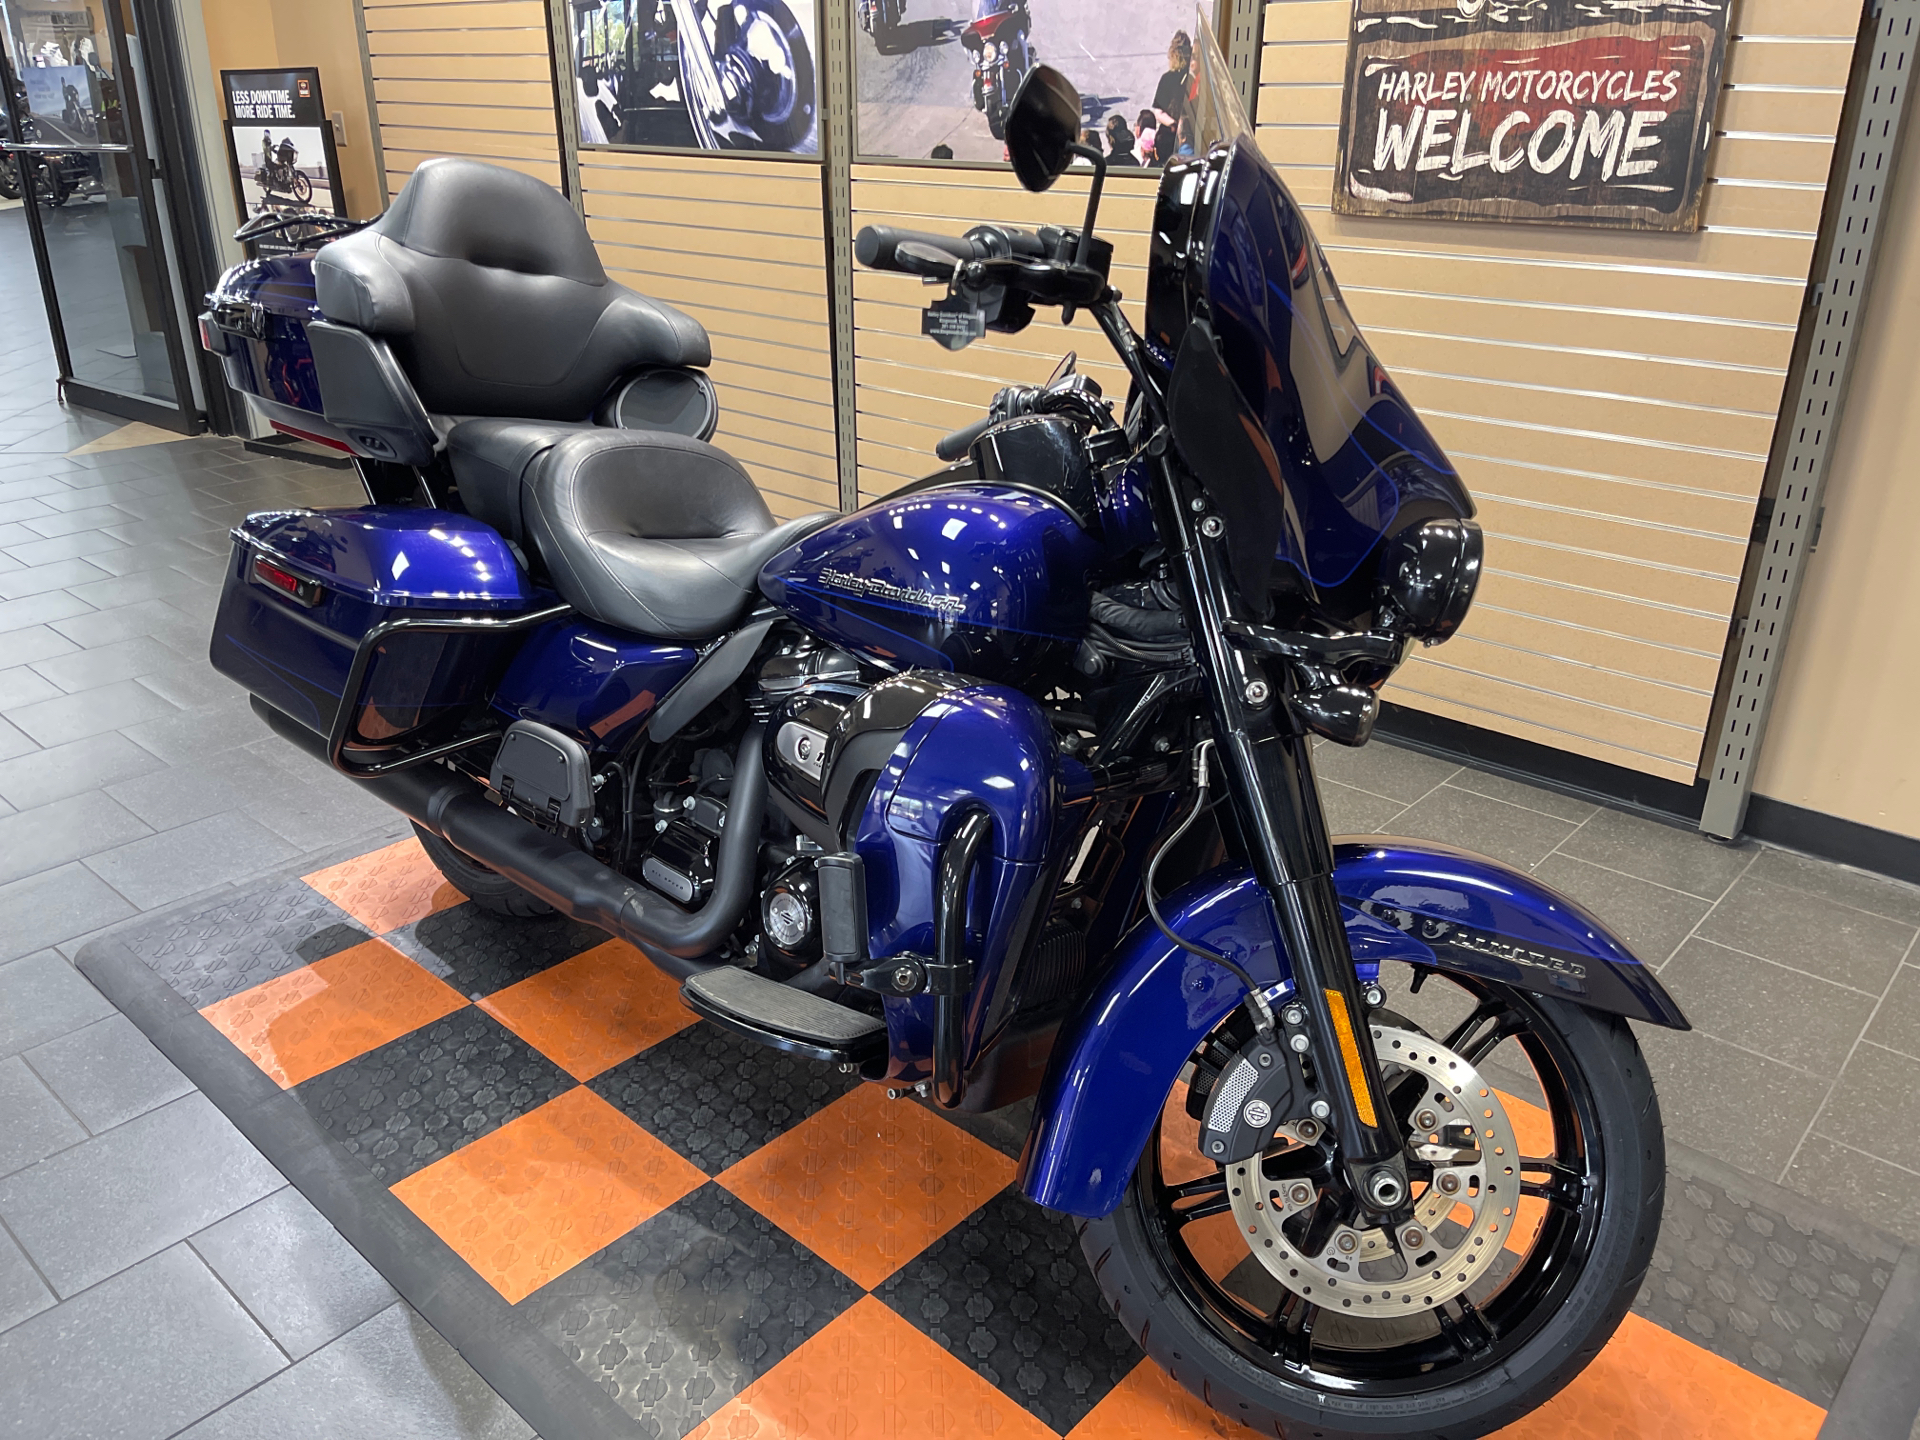 2020 Harley-Davidson Ultra Limited in The Woodlands, Texas - Photo 2